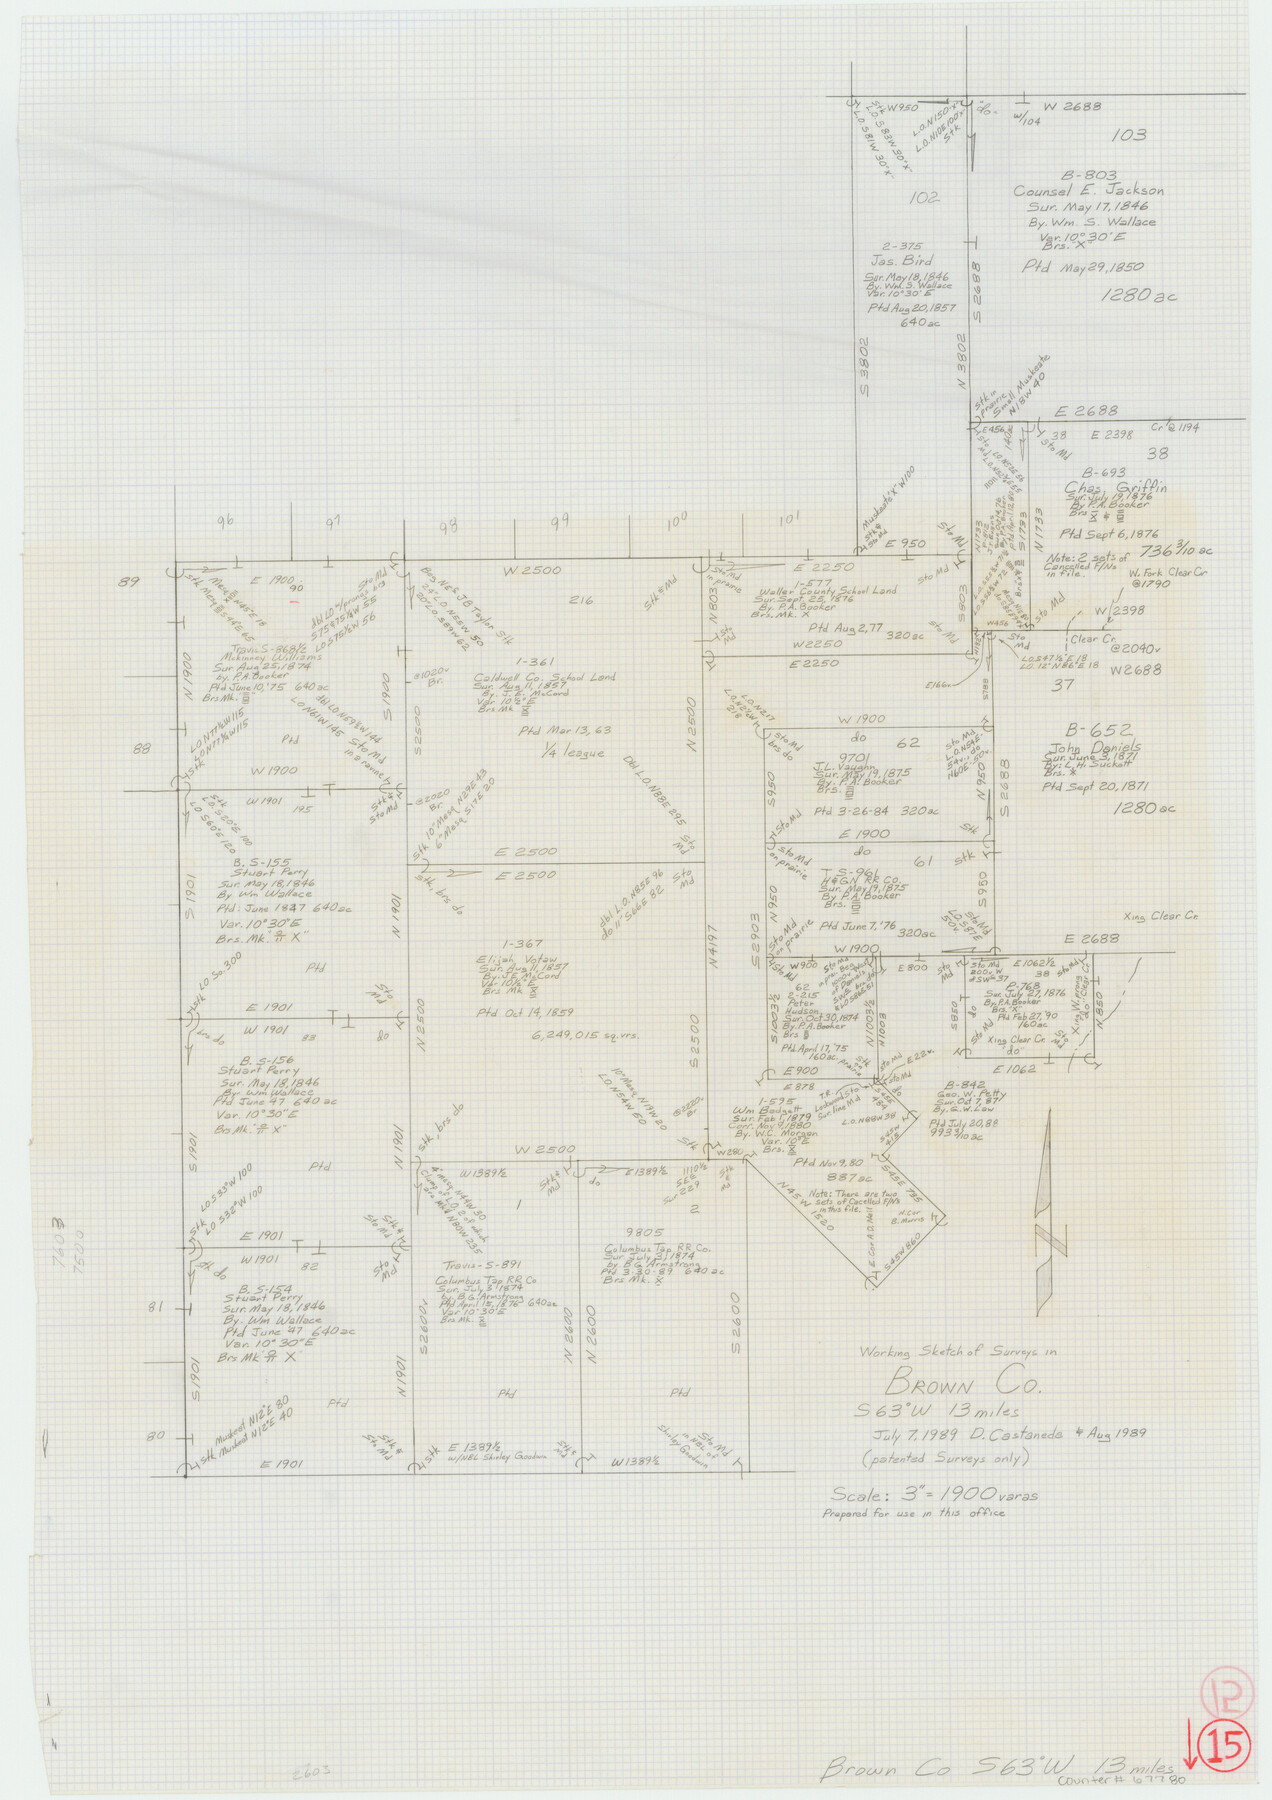 67780, Brown County Working Sketch 15, General Map Collection